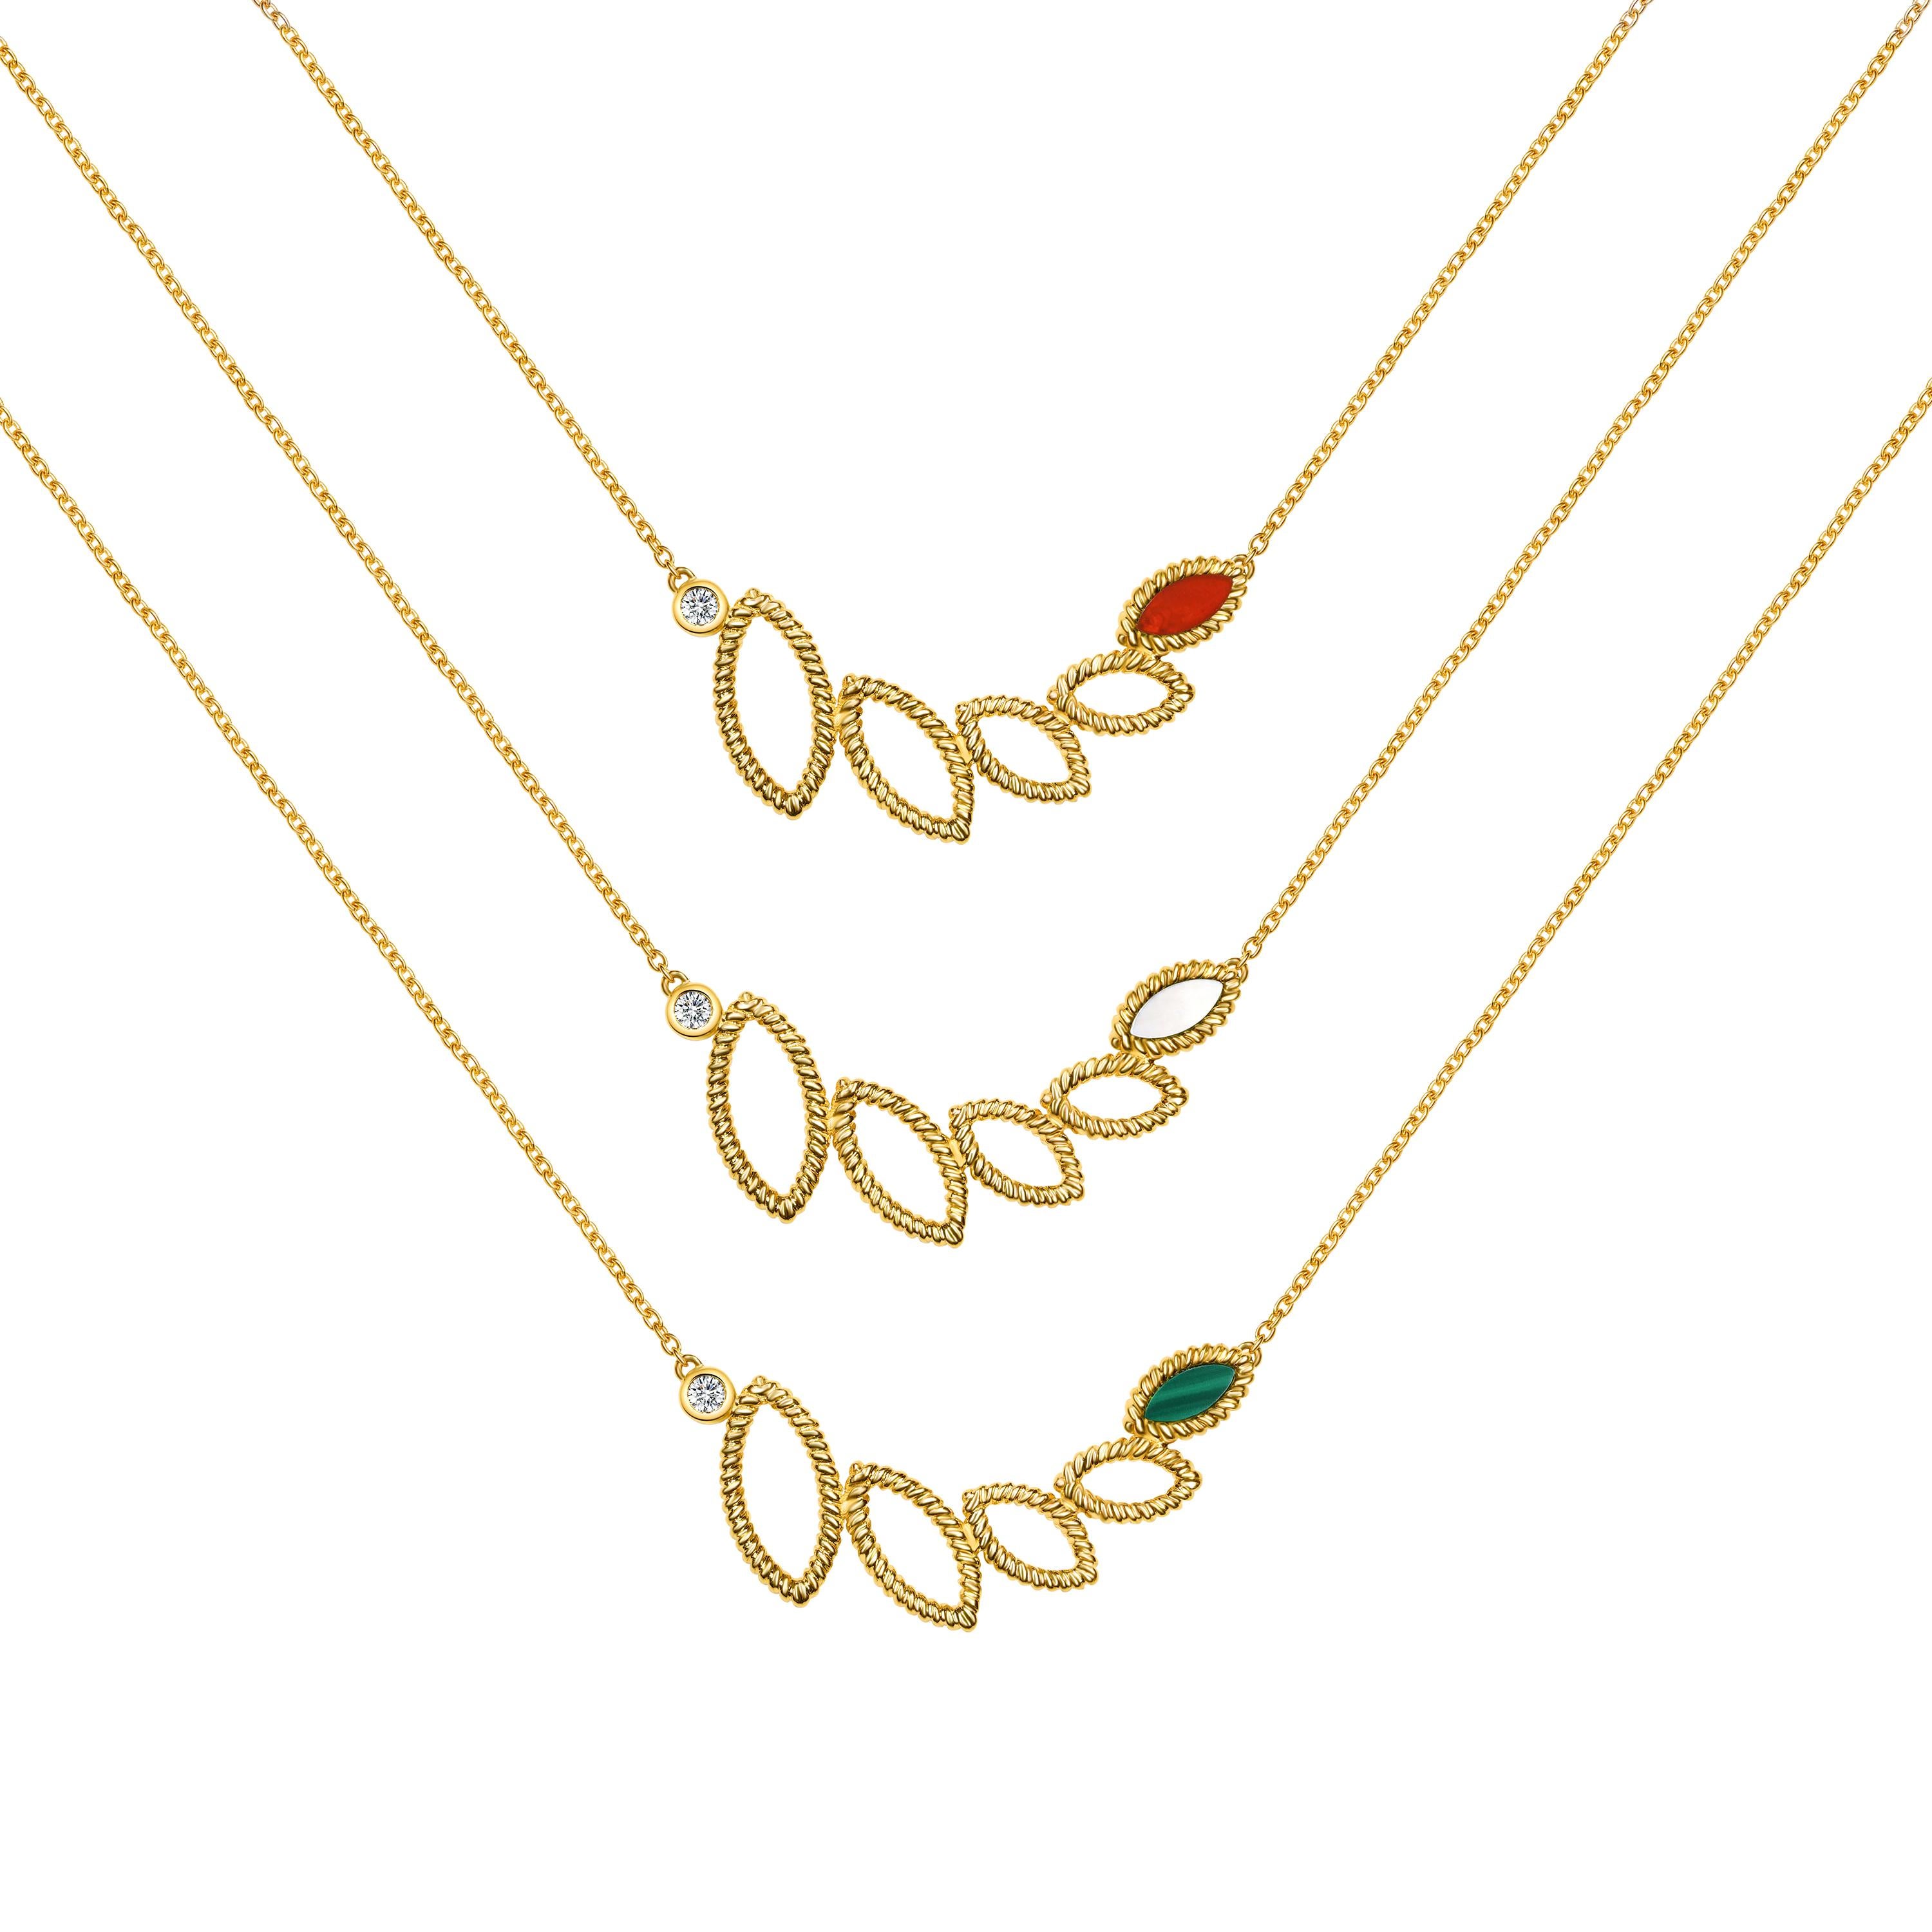 Women's or Men's 18 Karat Yellow Gold Mini Q Garden Necklace with Diamonds and Mother of Pearl For Sale